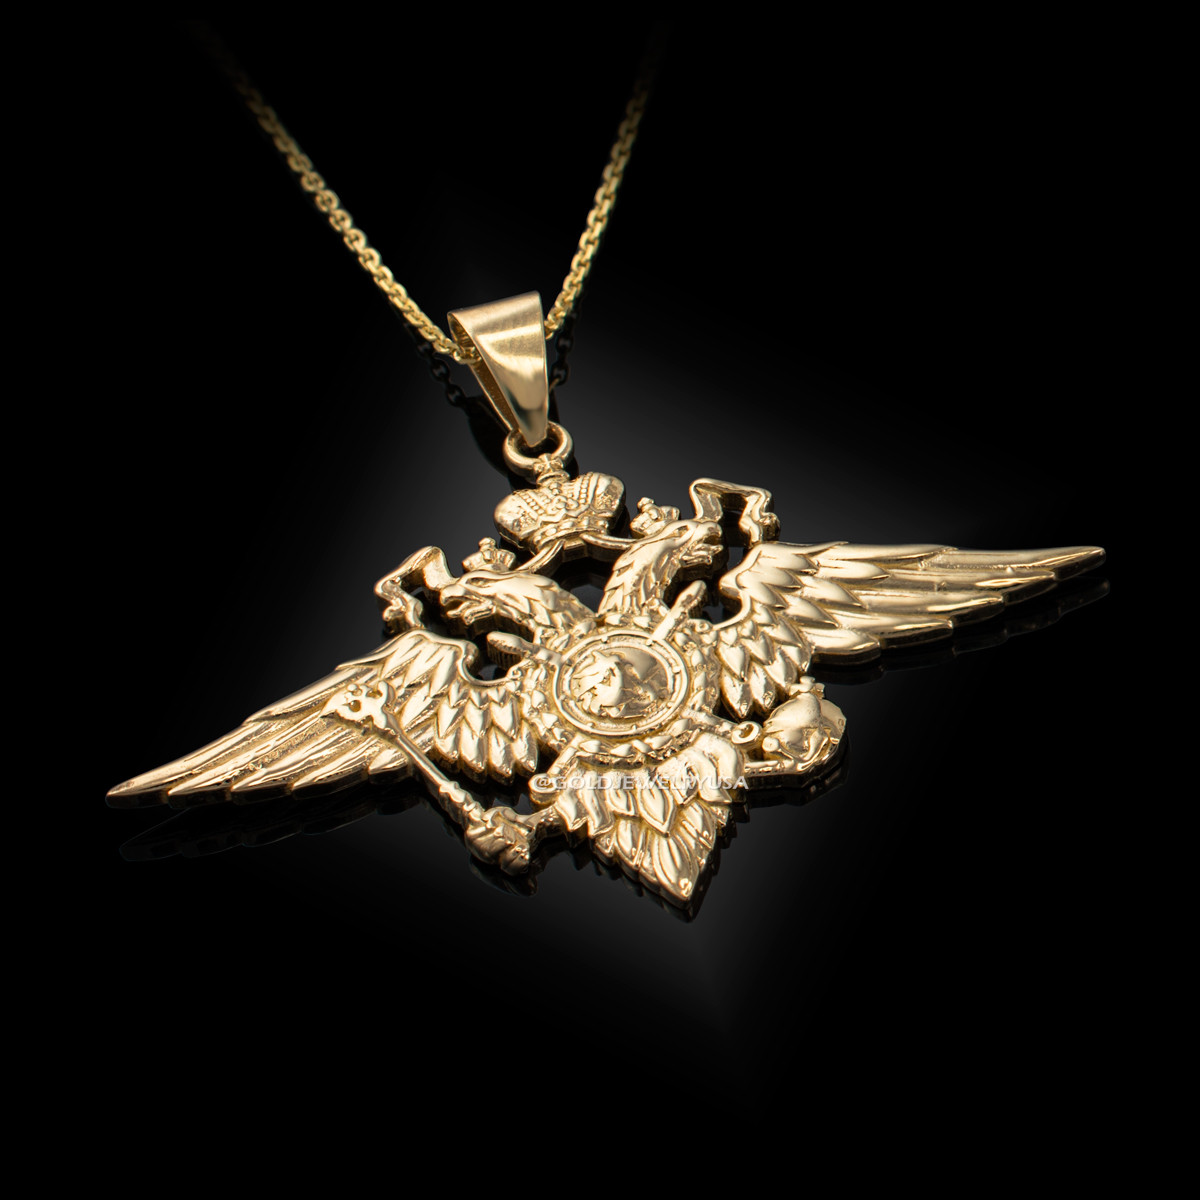 Gold Tone Eagle Necklace and Pendant Vintage Polished 18 in long NEW 